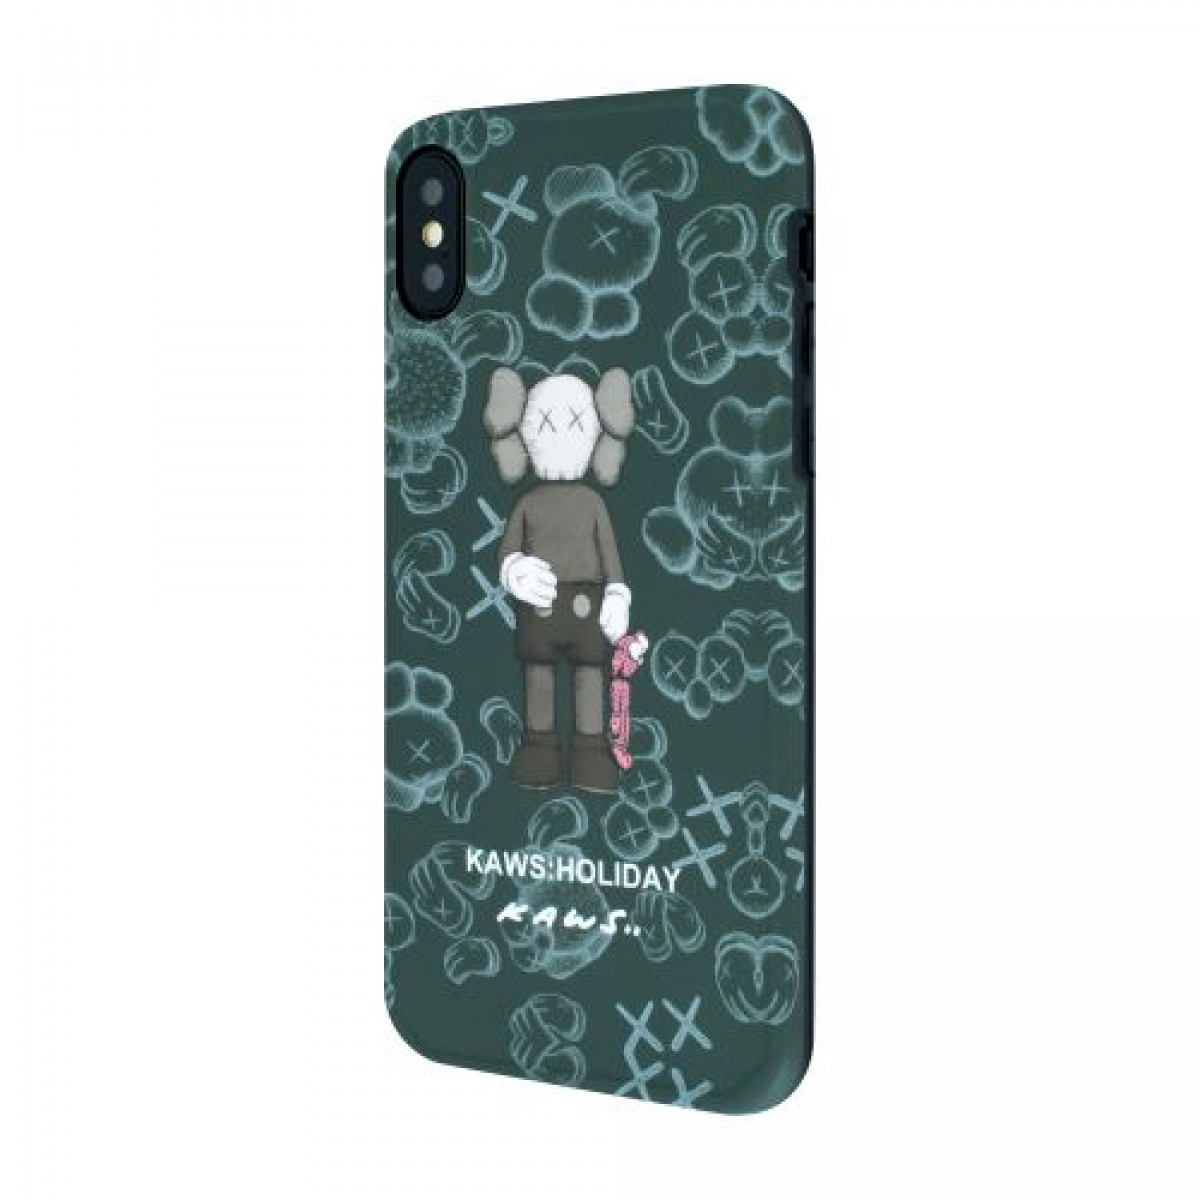 IMD Print Kaws Holiday Case for iPhone X/XS